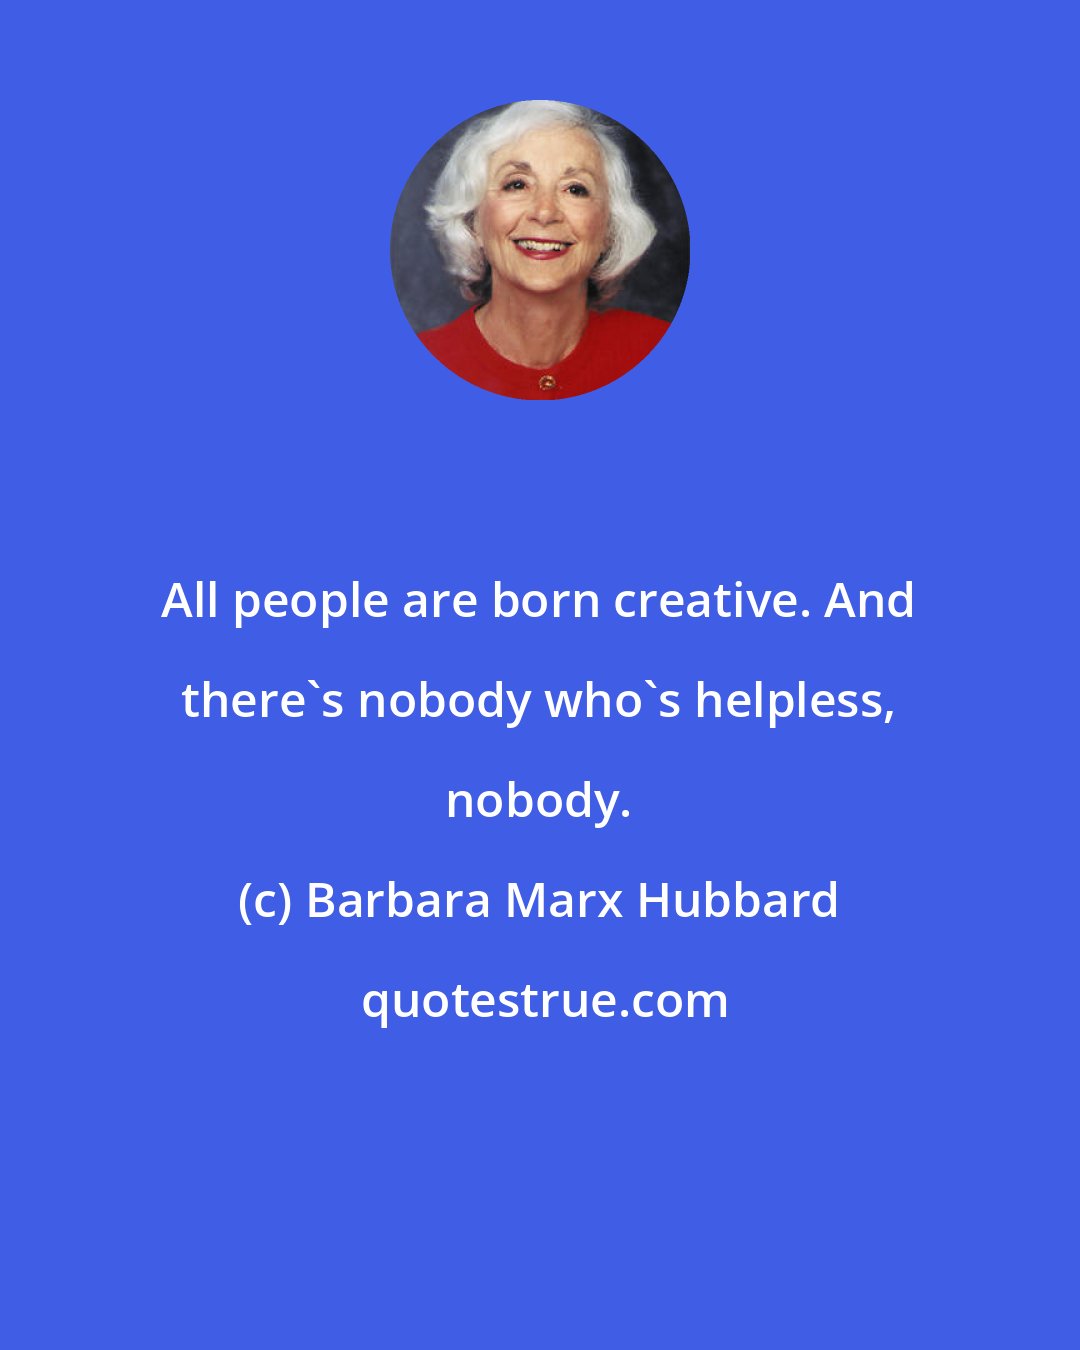 Barbara Marx Hubbard: All people are born creative. And there's nobody who's helpless, nobody.